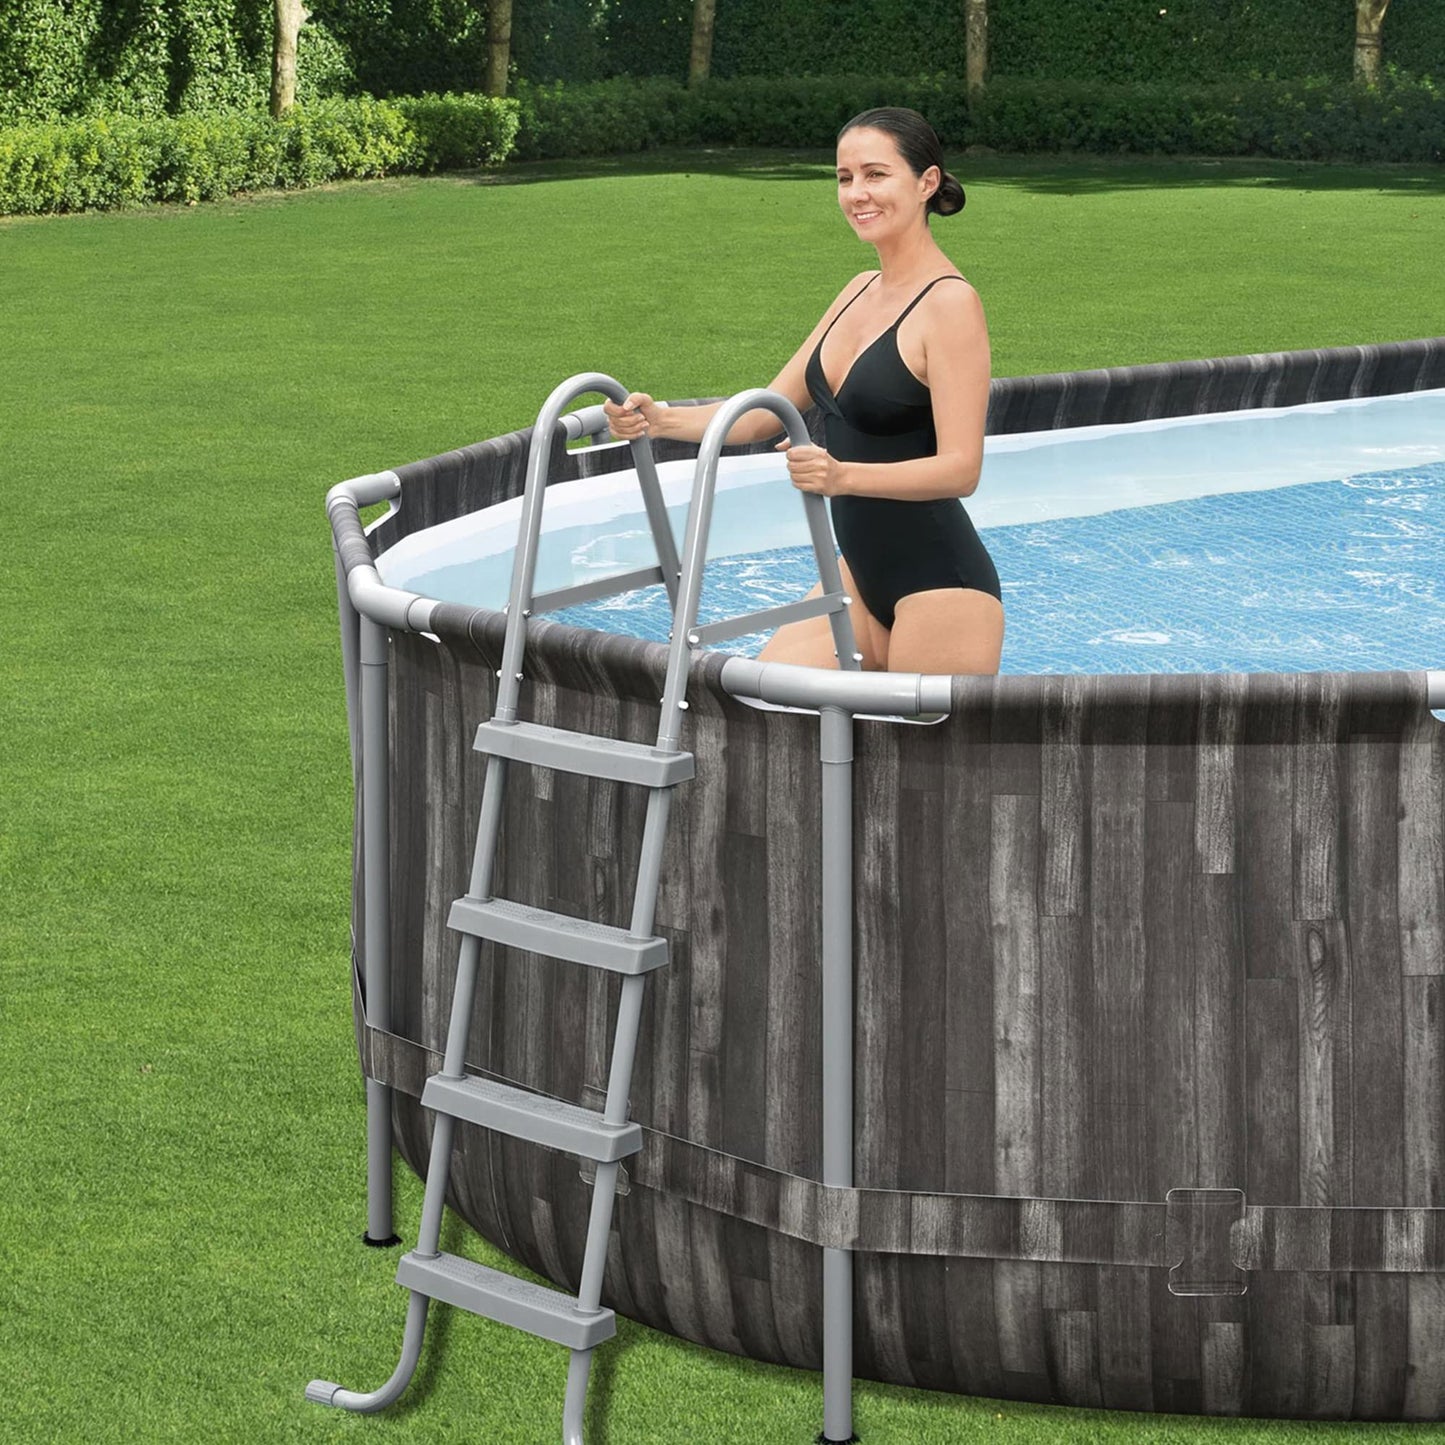 Bestway Power Steel 24' x 12' x 48" Rectangular Metal Frame Above Ground Swimming Pool Set with 2500 GPH Filter Pump, Ladder, and Pool Cover 24' x 12' x 28"